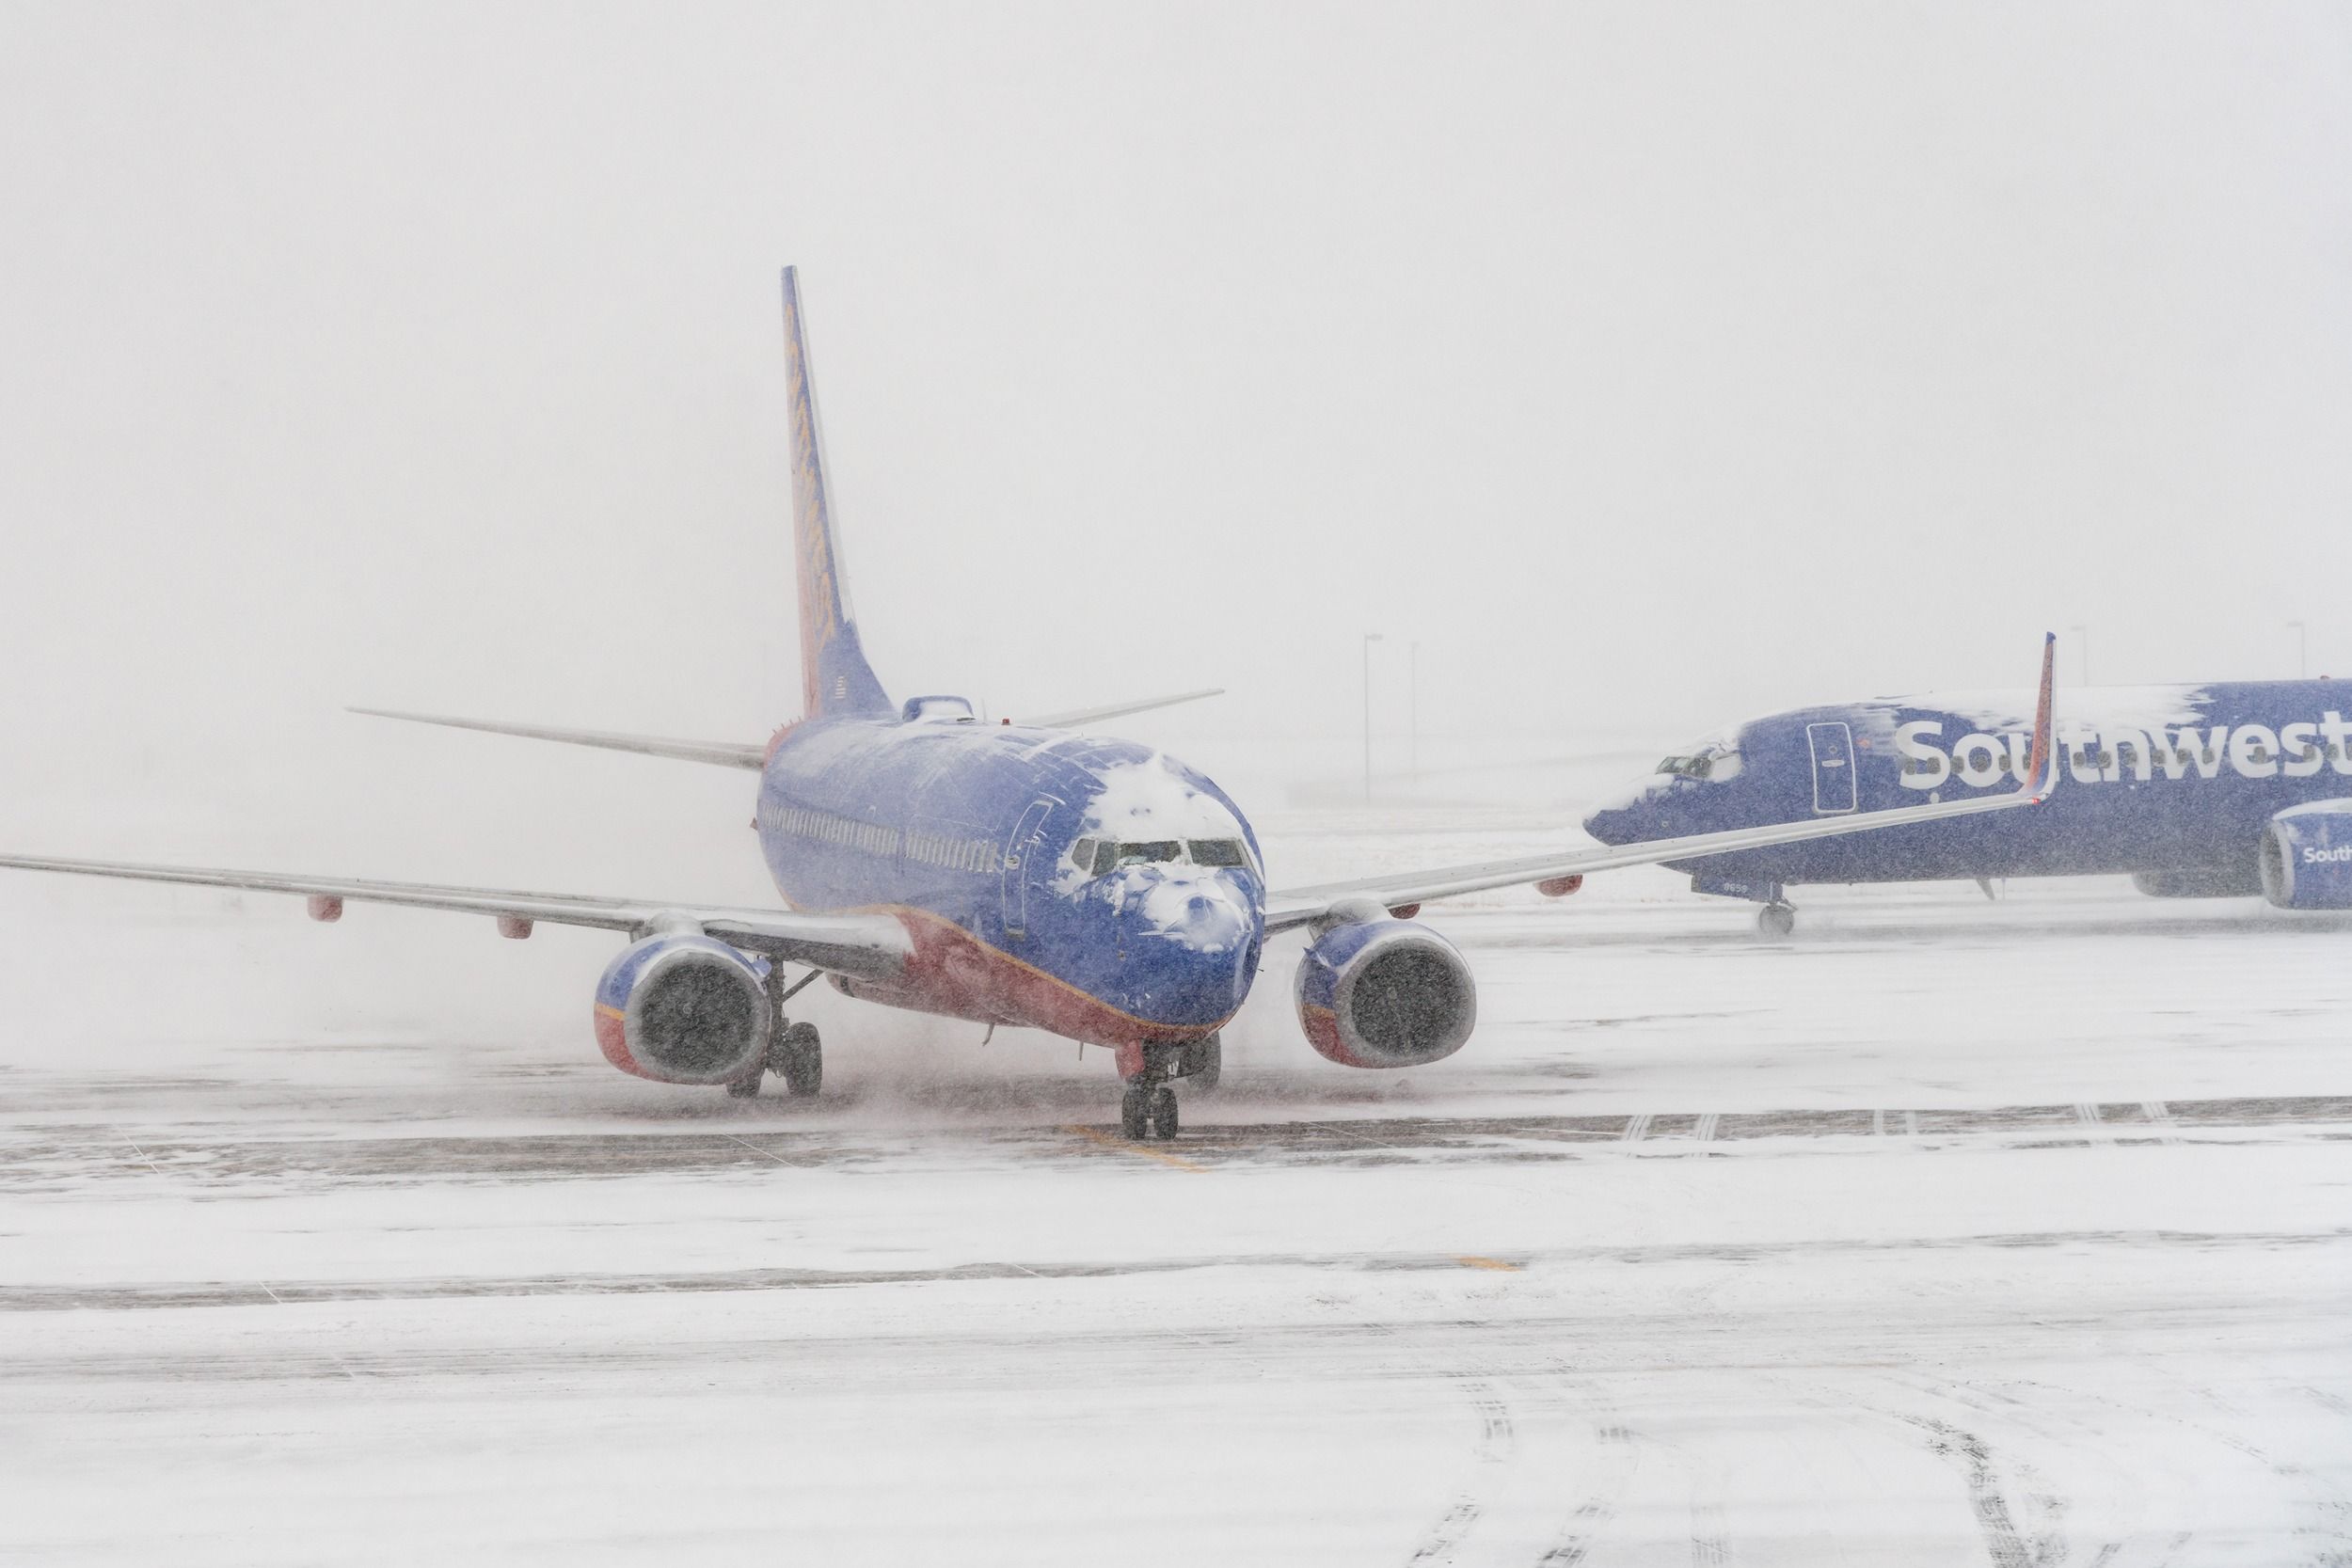 A Southwest Airlines Boeing 737s during a winter storm.